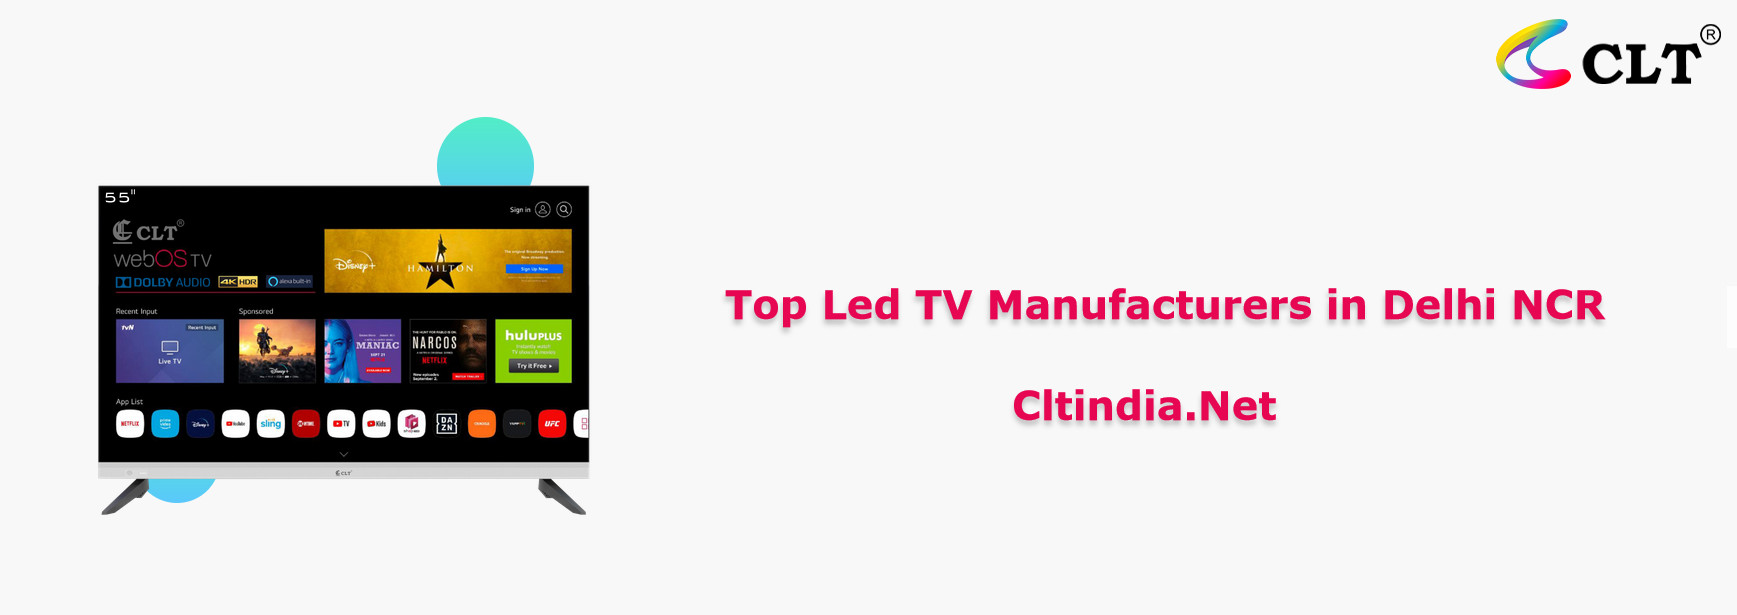 Top Led TV Manufacturers in Delhi NCR - CLT India